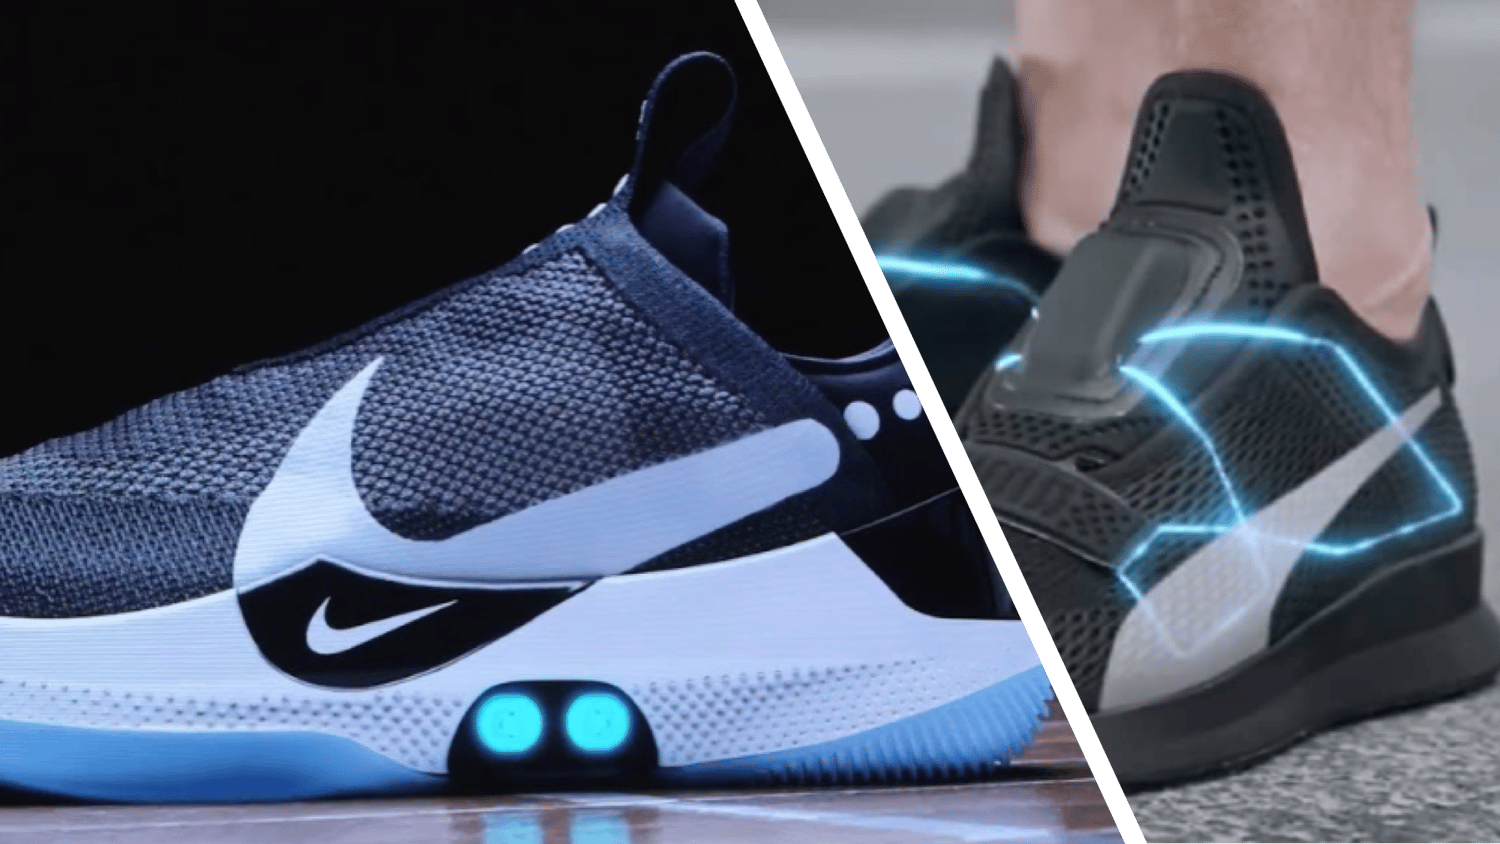 Back to the Future: NIKE and Puma both deliver self-lacing shoes